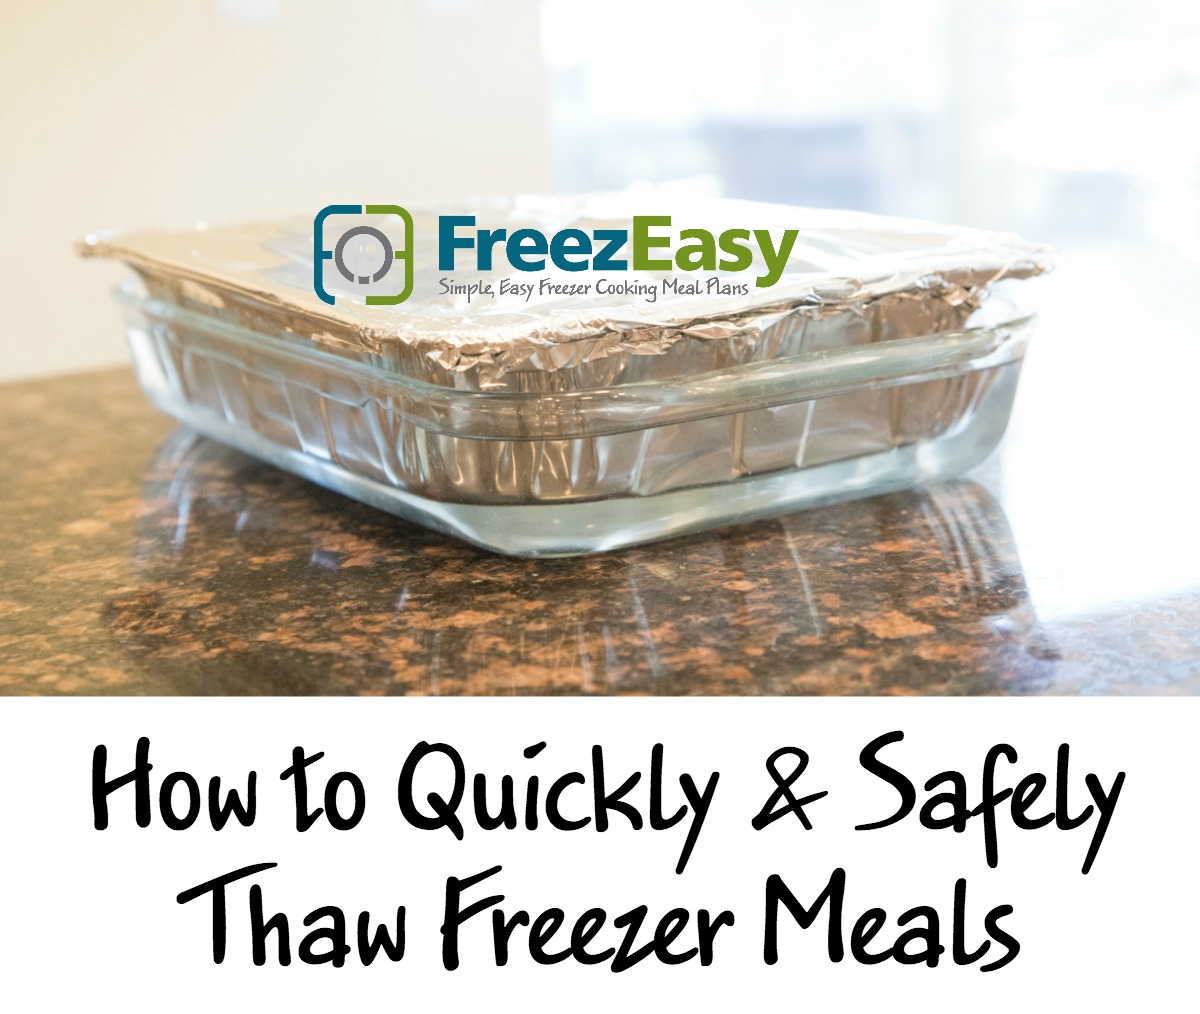 How to Thaw Freezer Meals